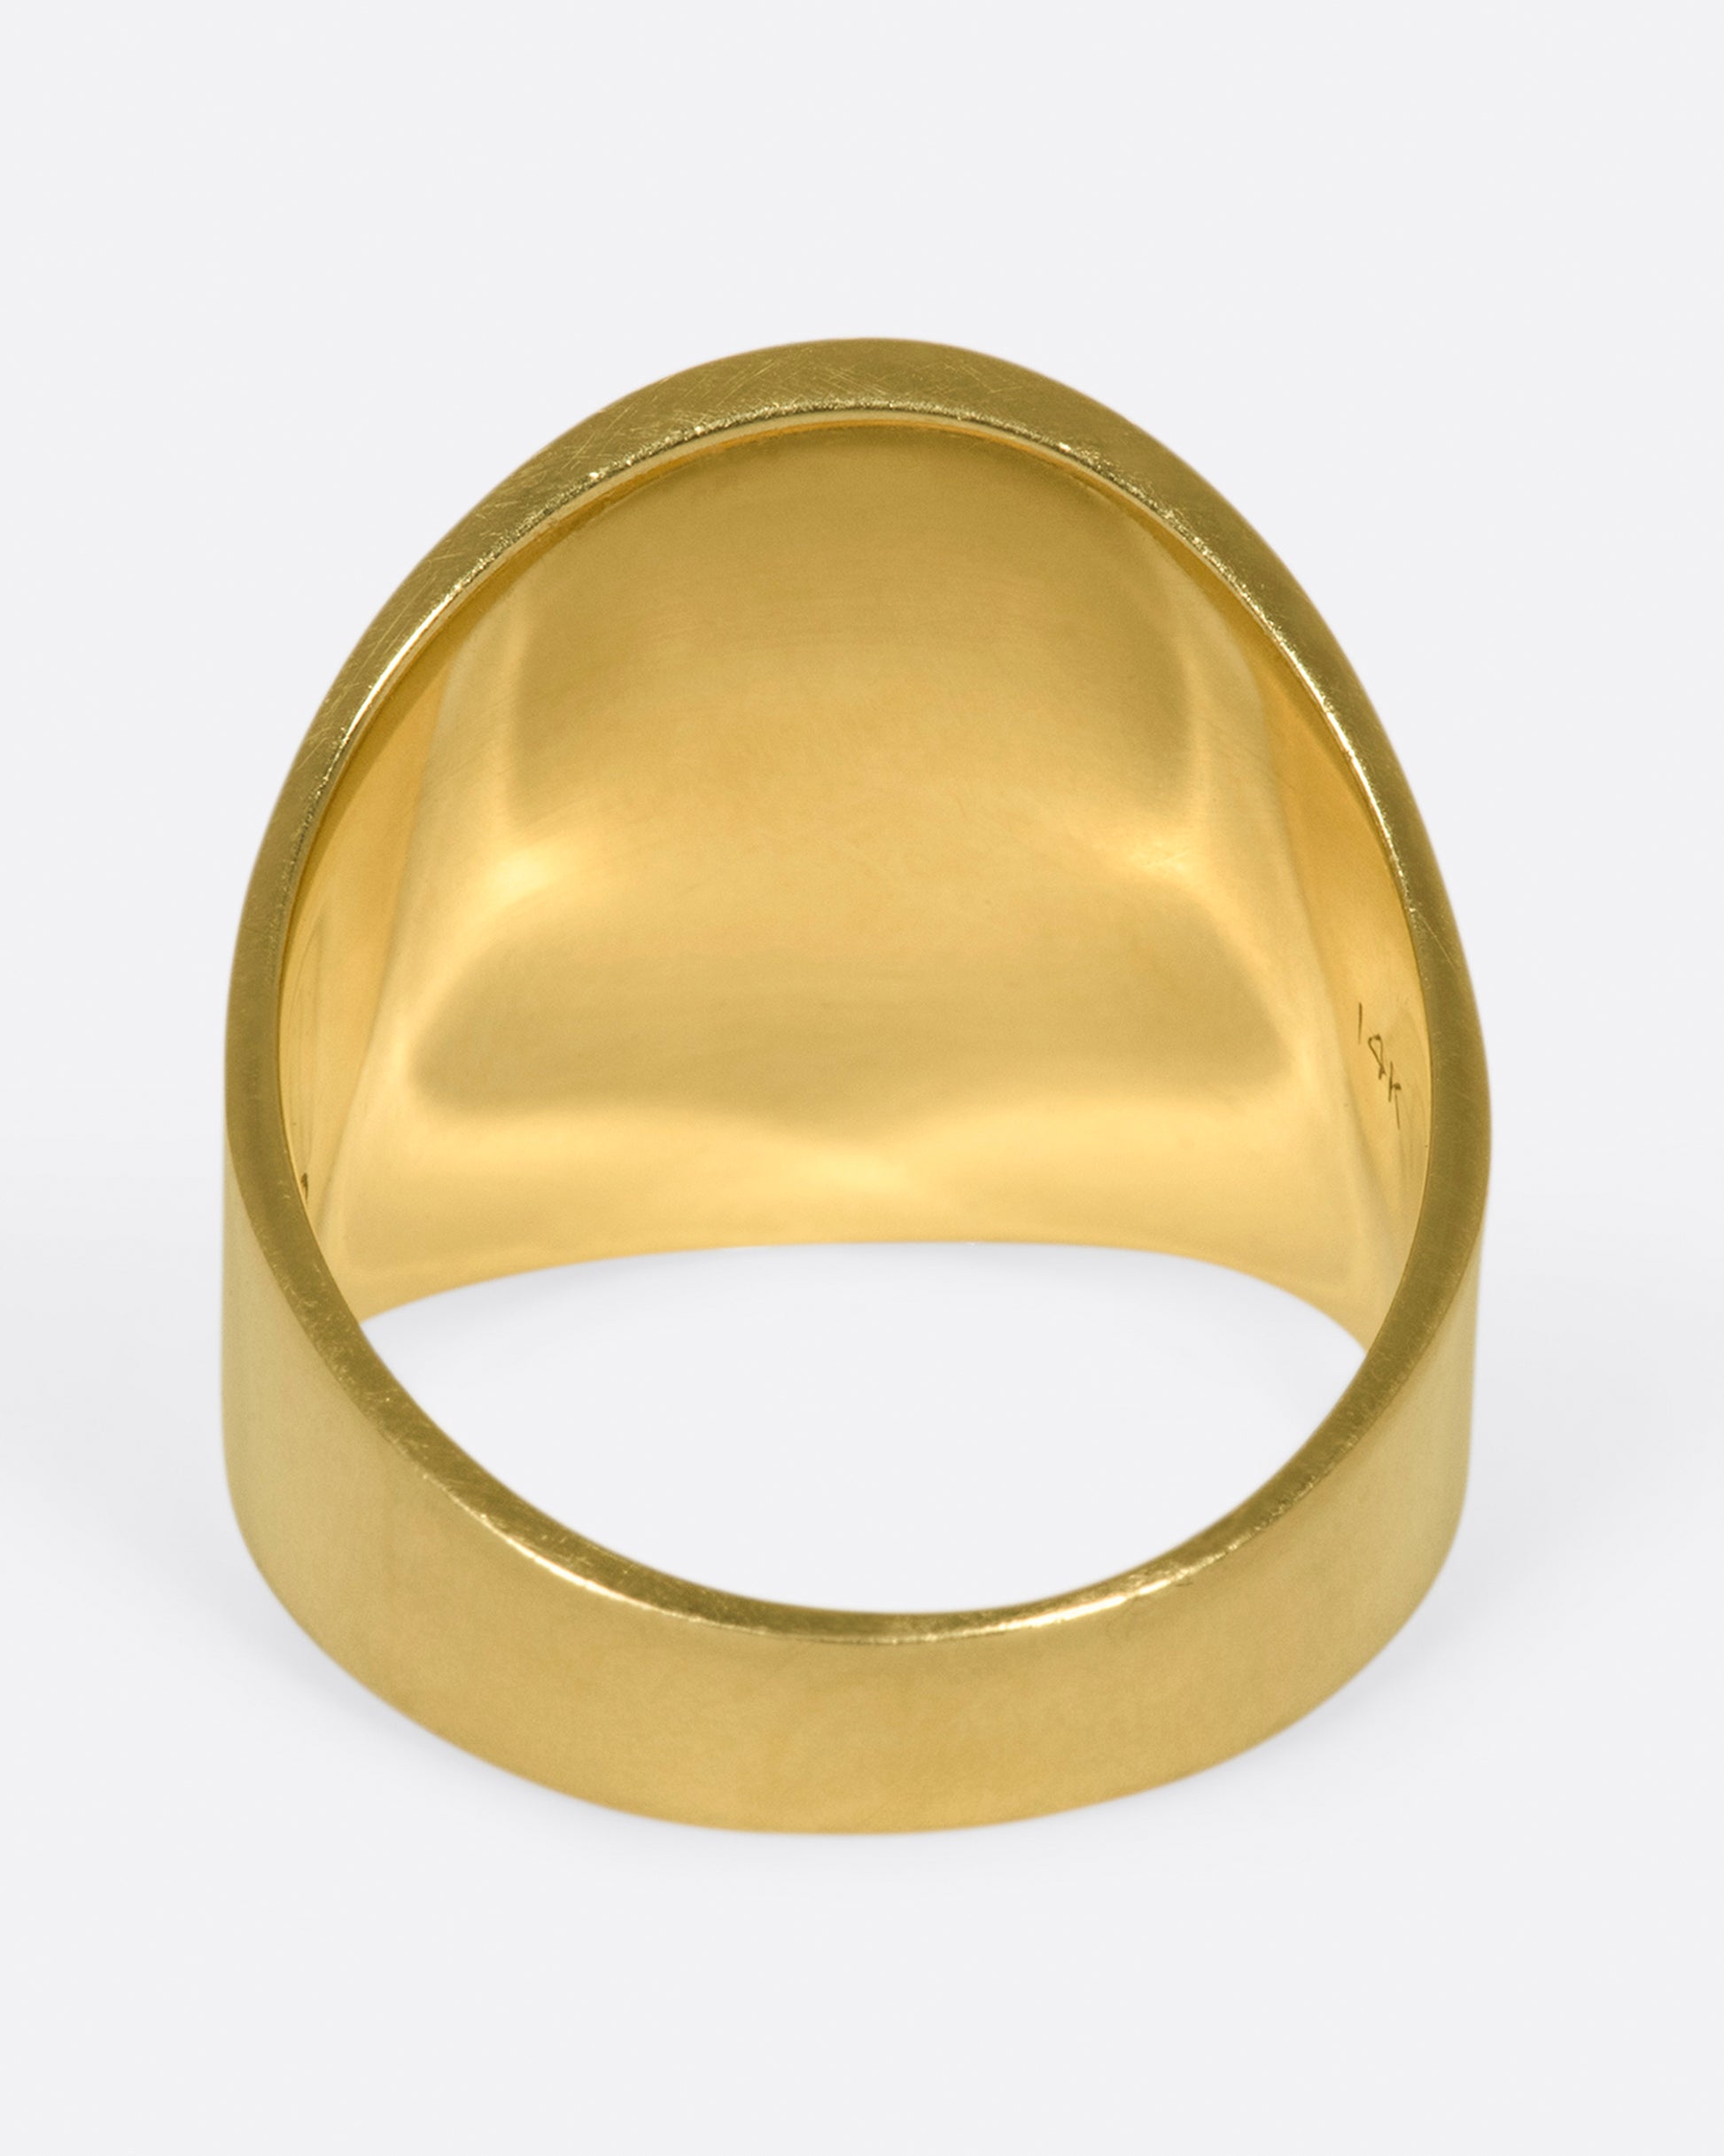 A vintage gold ring with a curved face.